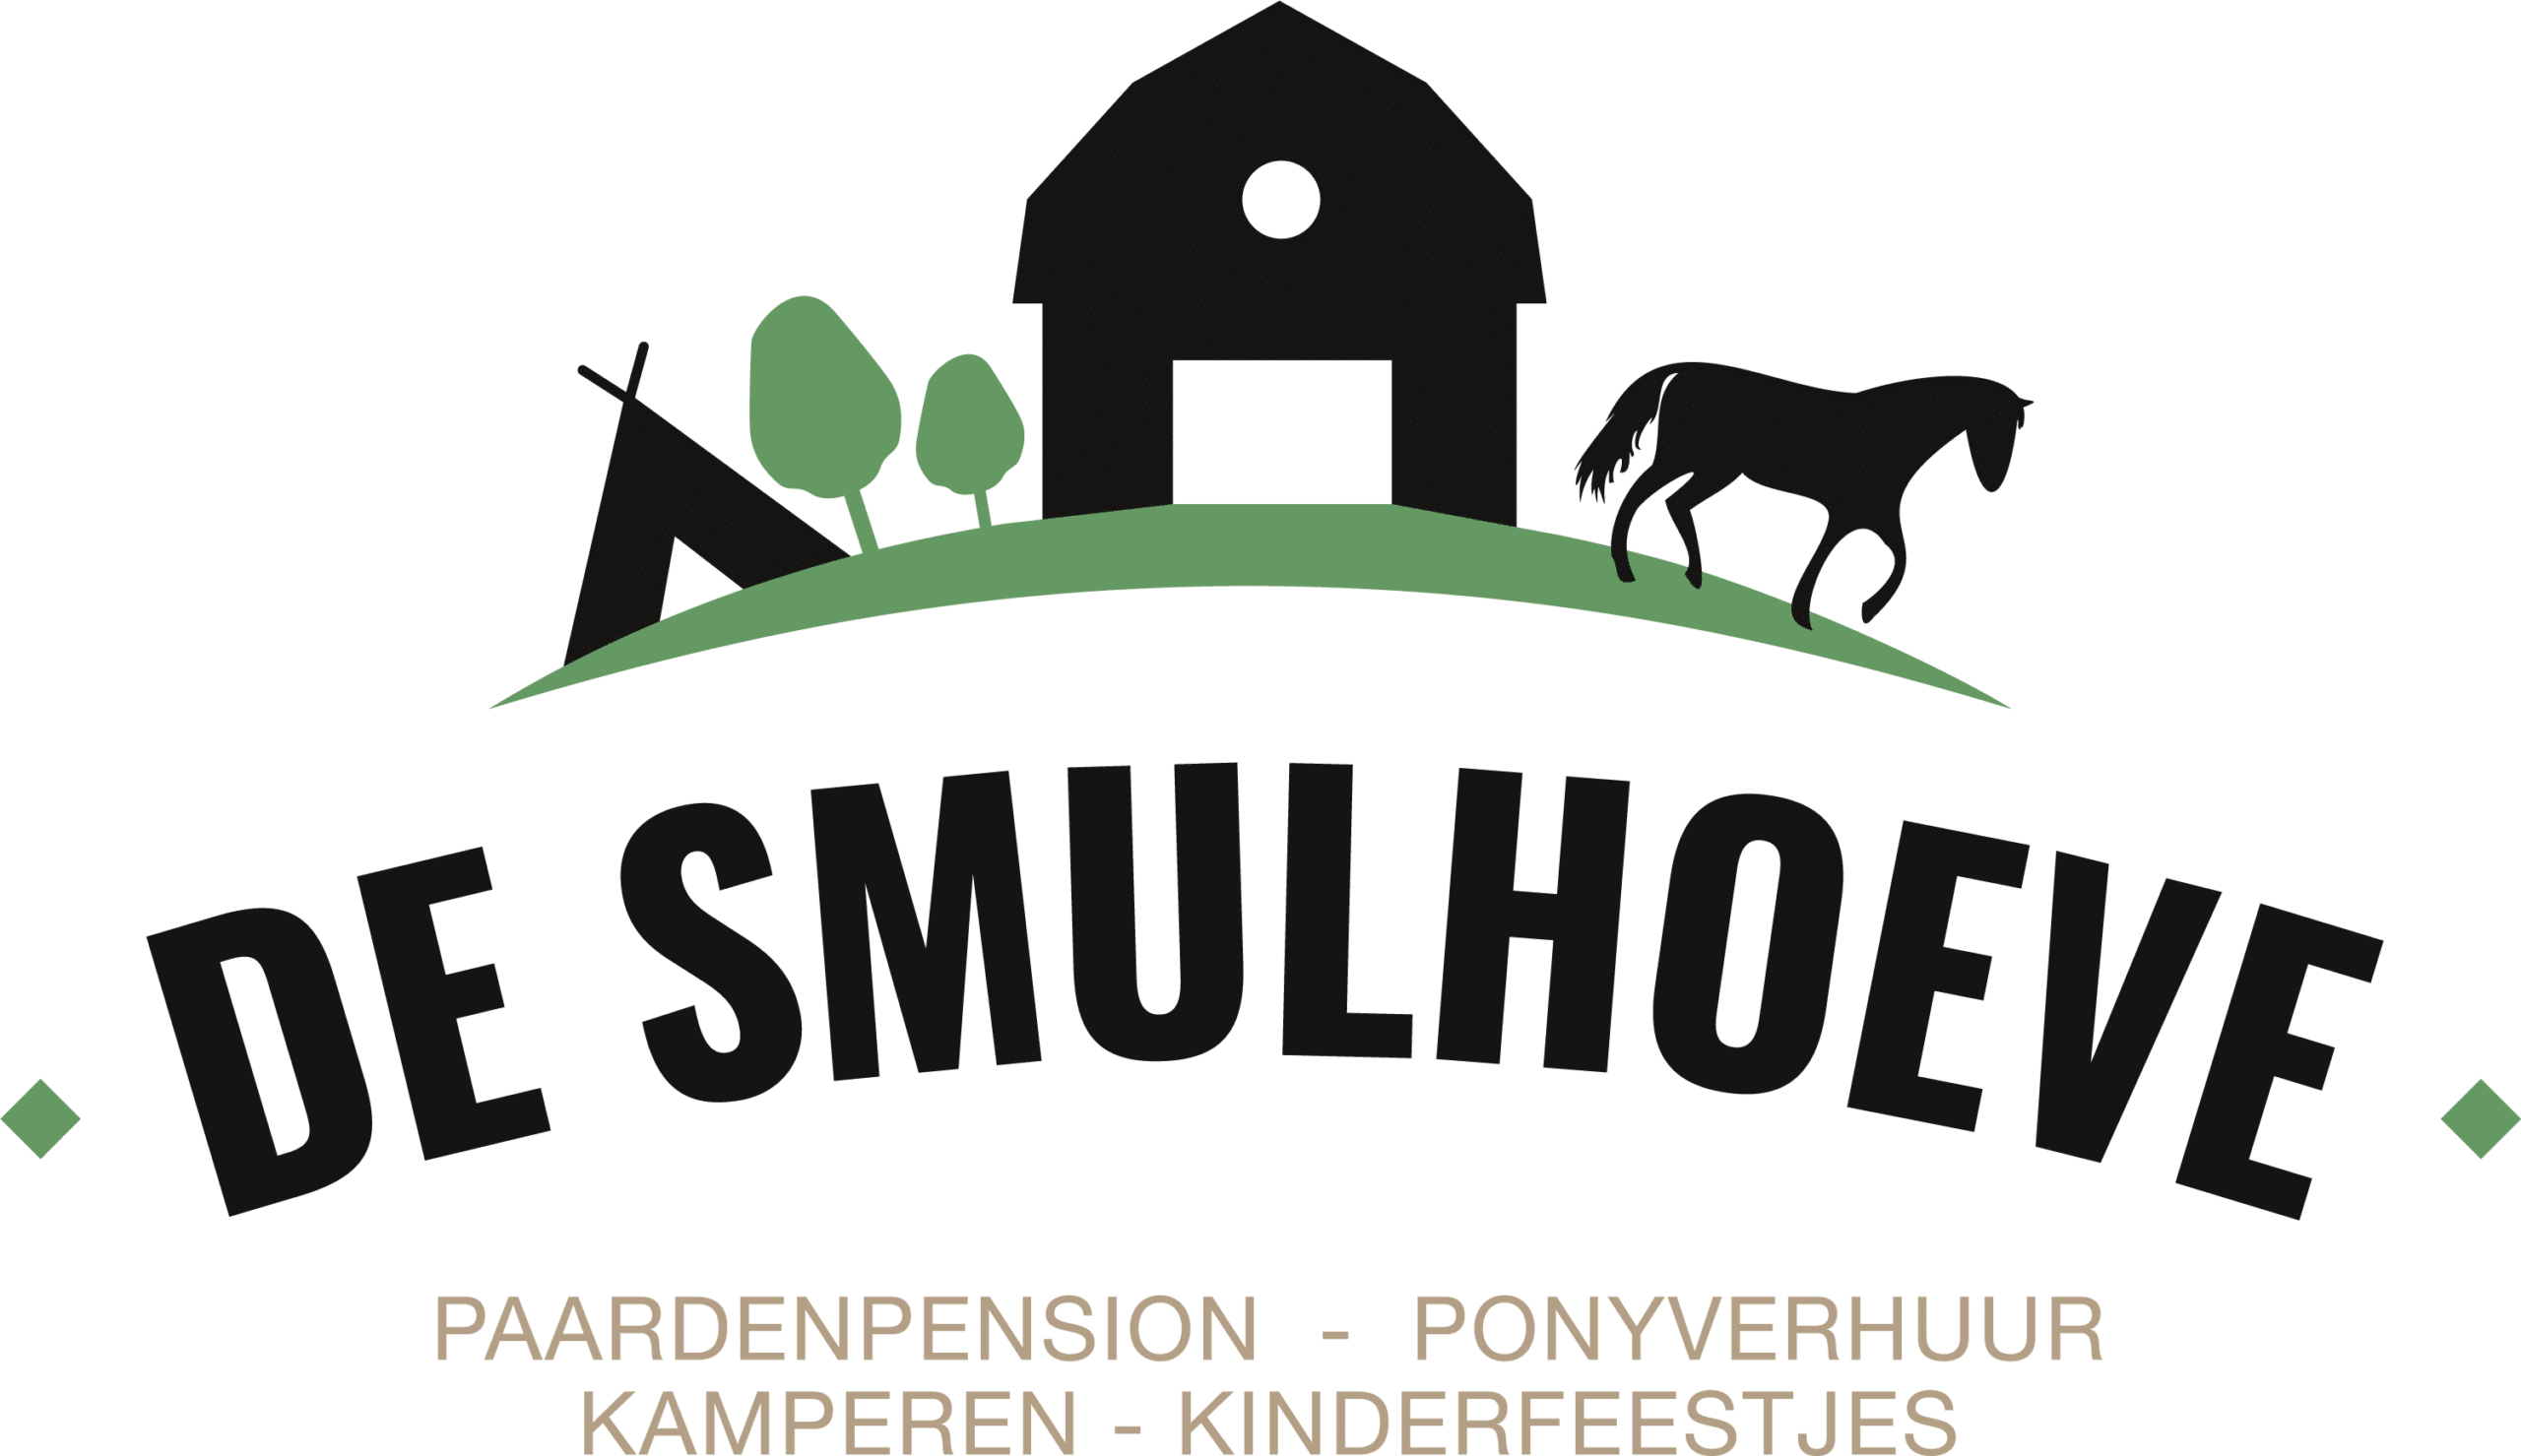 the Smulhoeve